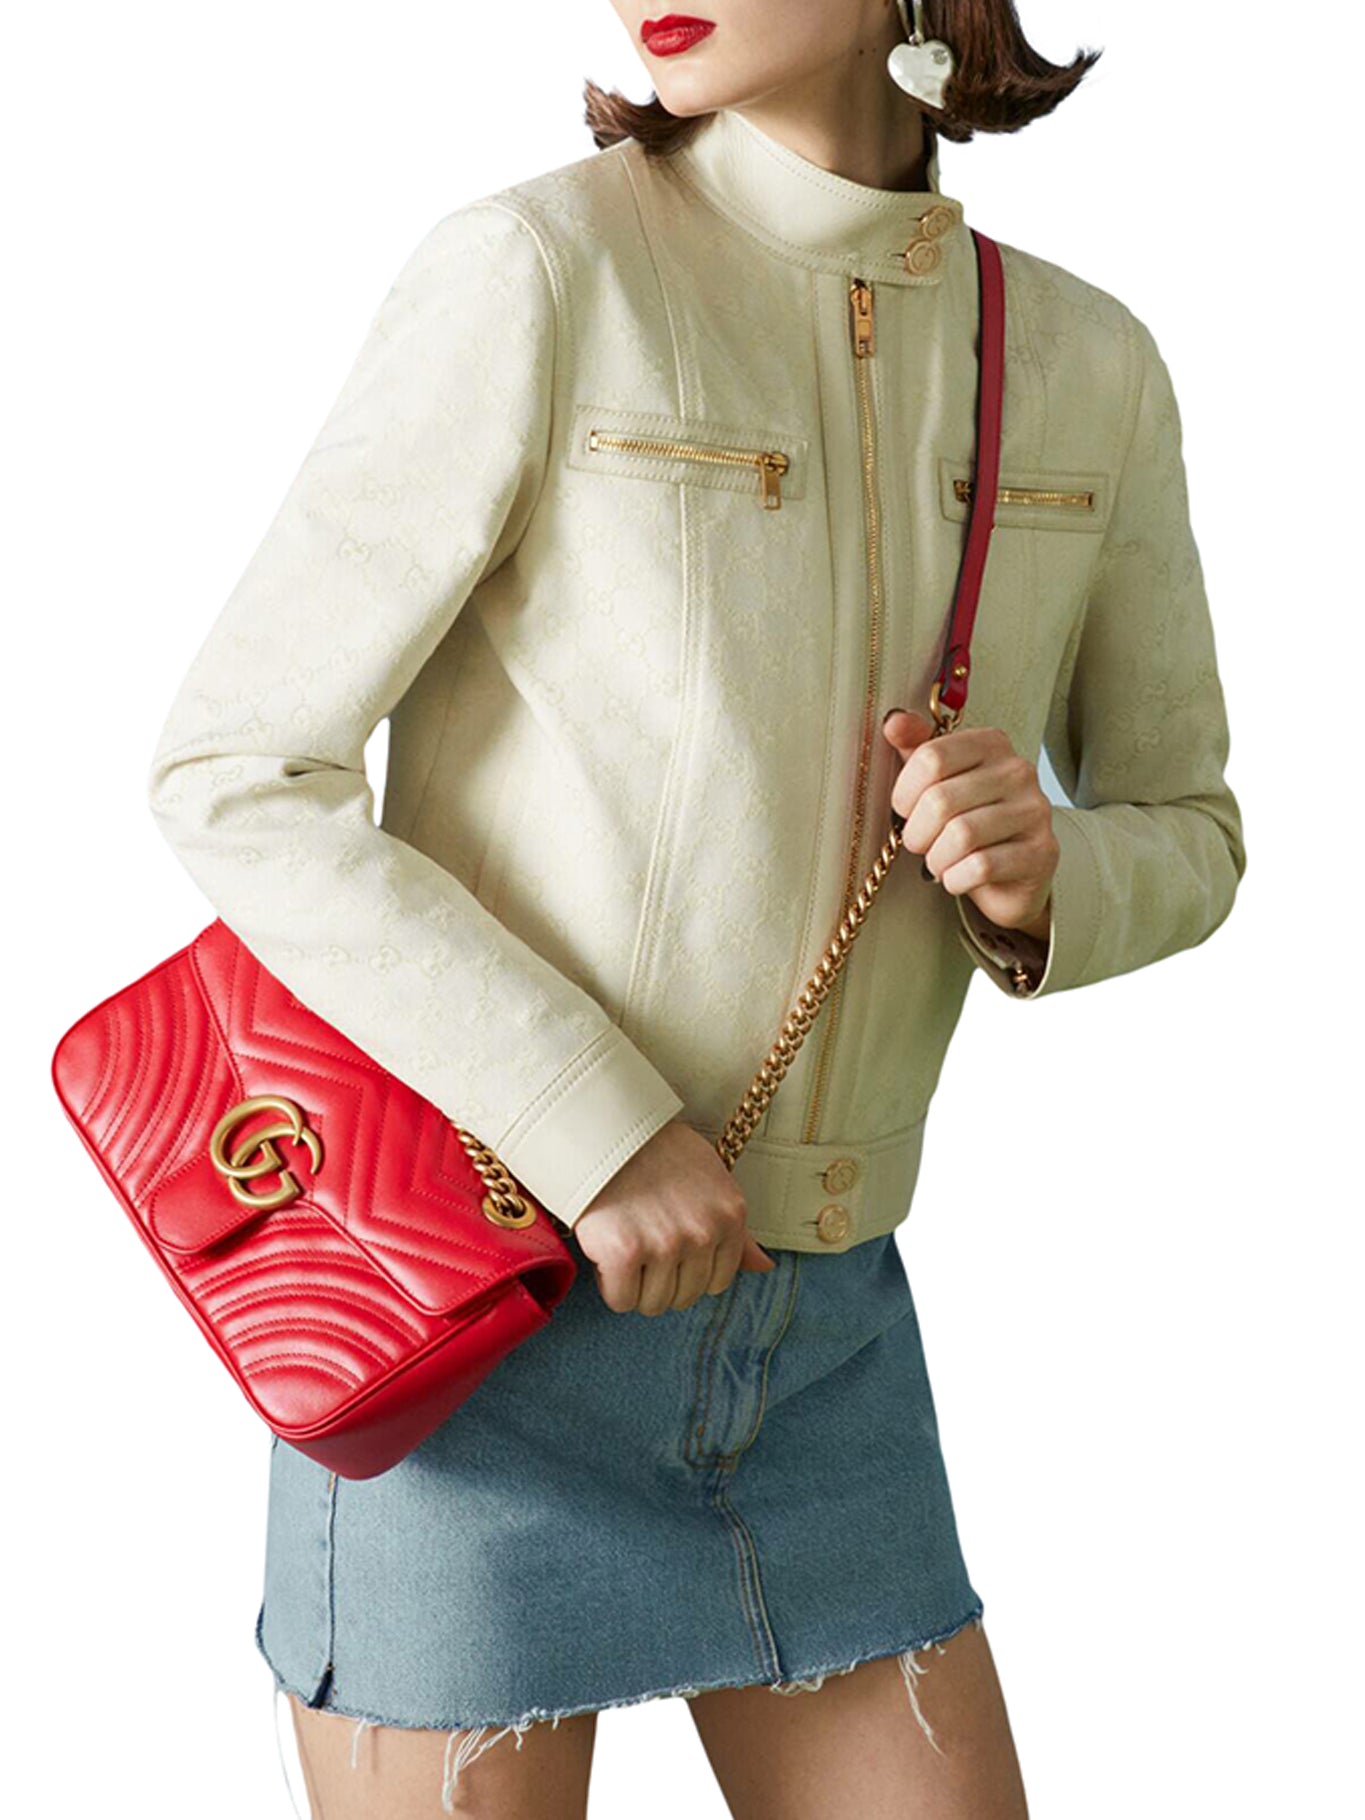 POPPY BRIGHT RED LEATHER GG MARMONT SMALL SHOULDER BAG